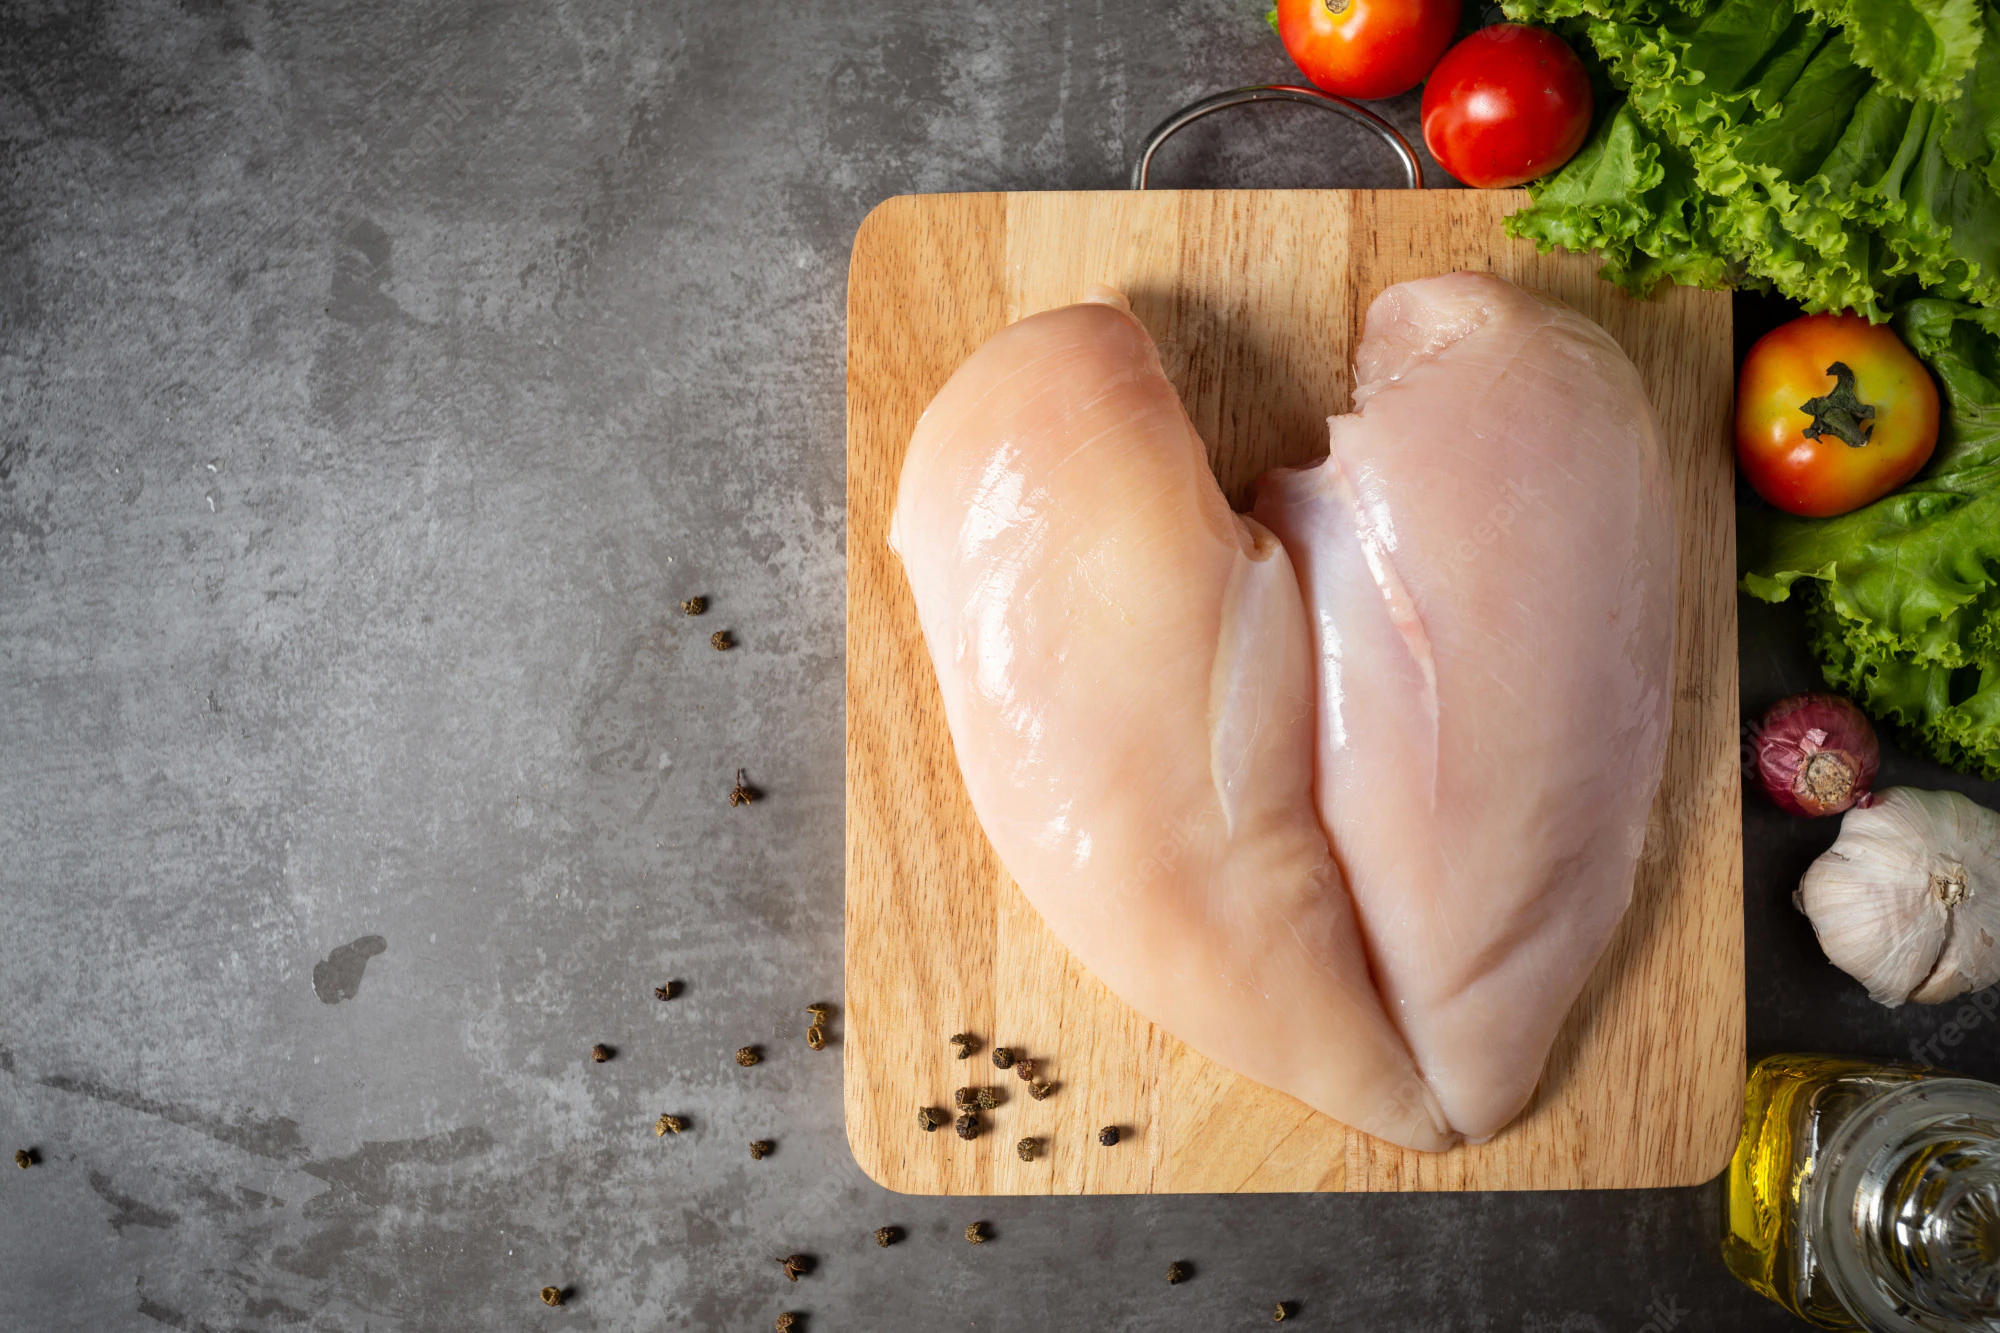 100g cooked chicken breast nutrition